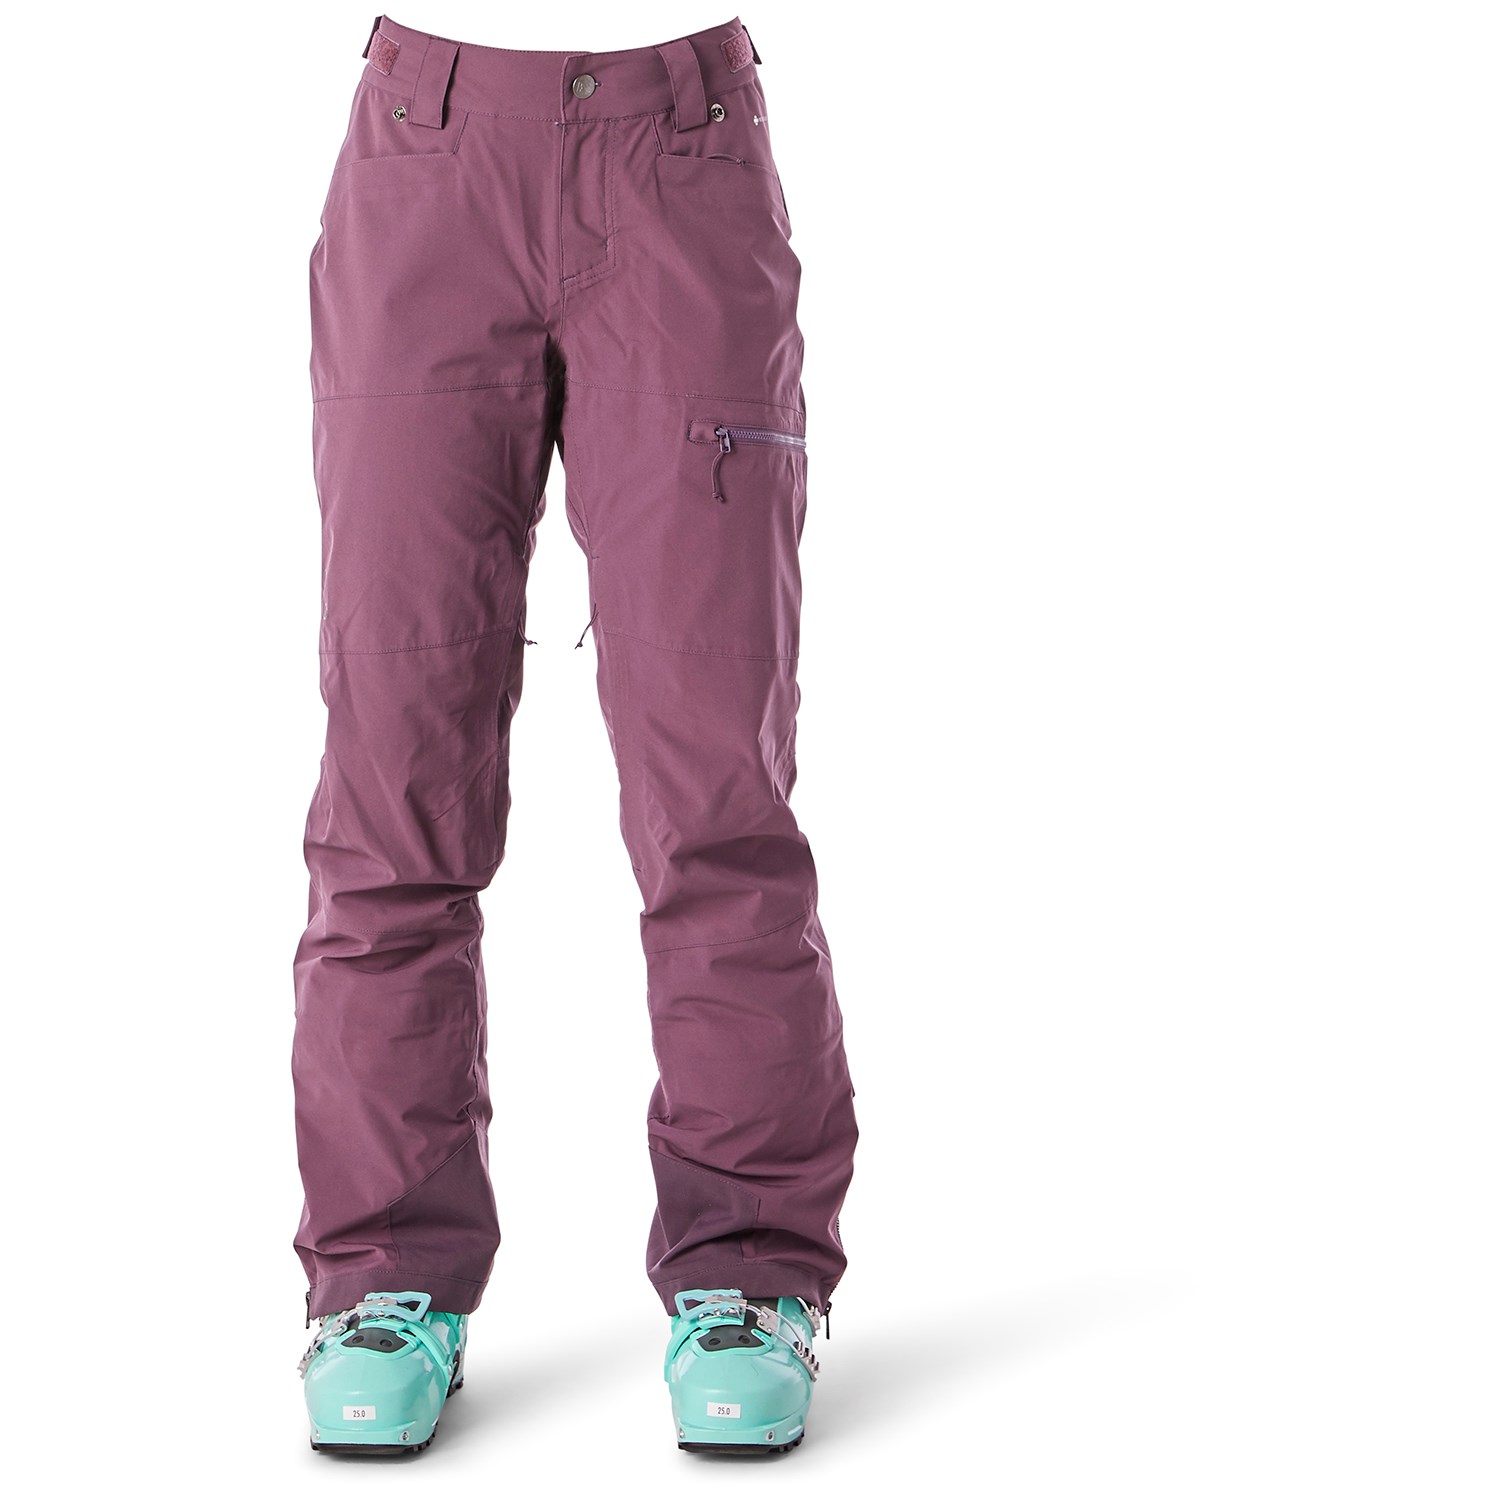 Flylow Womens Donna 2.1 Pants Waterproof 3-Layer Stretch Backountry Skiing and Snowboarding Pant